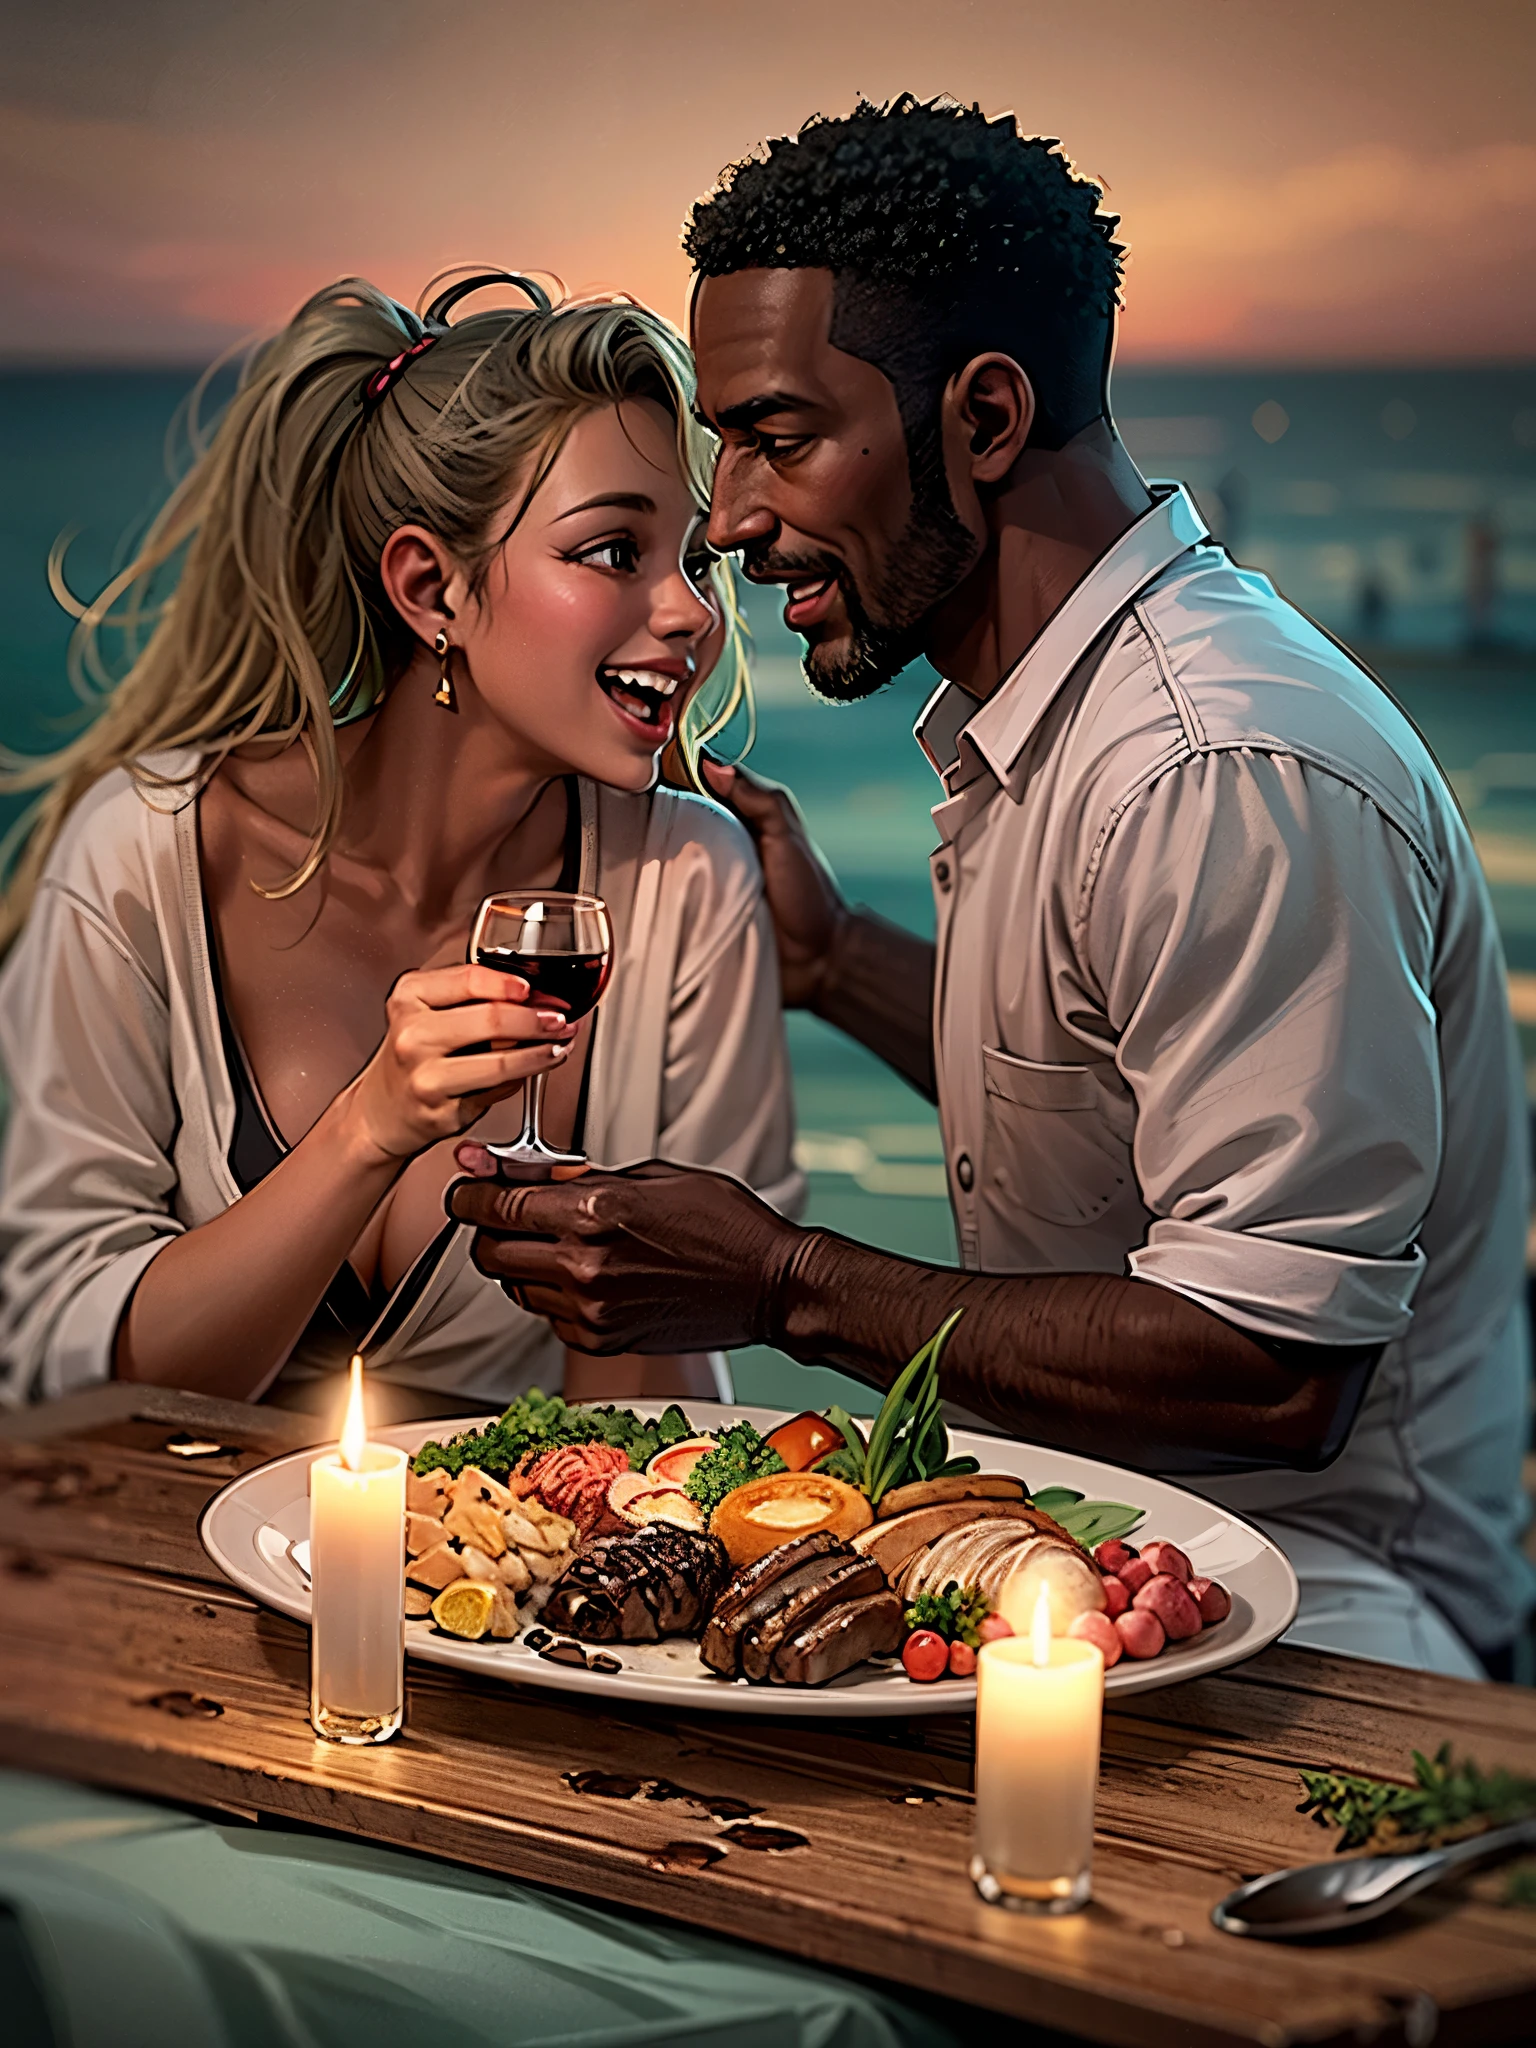 Photograph of 25 year old beautiful white american woman with blonde hair and a 28 year old dark-skinned african-american man with short hair a goatee looking lovingly at each other while feeding each other having a candlelight dinner on a wooden raft in the ocean. loving facial expressions. plate of steak and mashed potatoes, bottle of wine, wine glasses., UHD, masterpiece, anatomically correct, textured skin, super detail, 8k